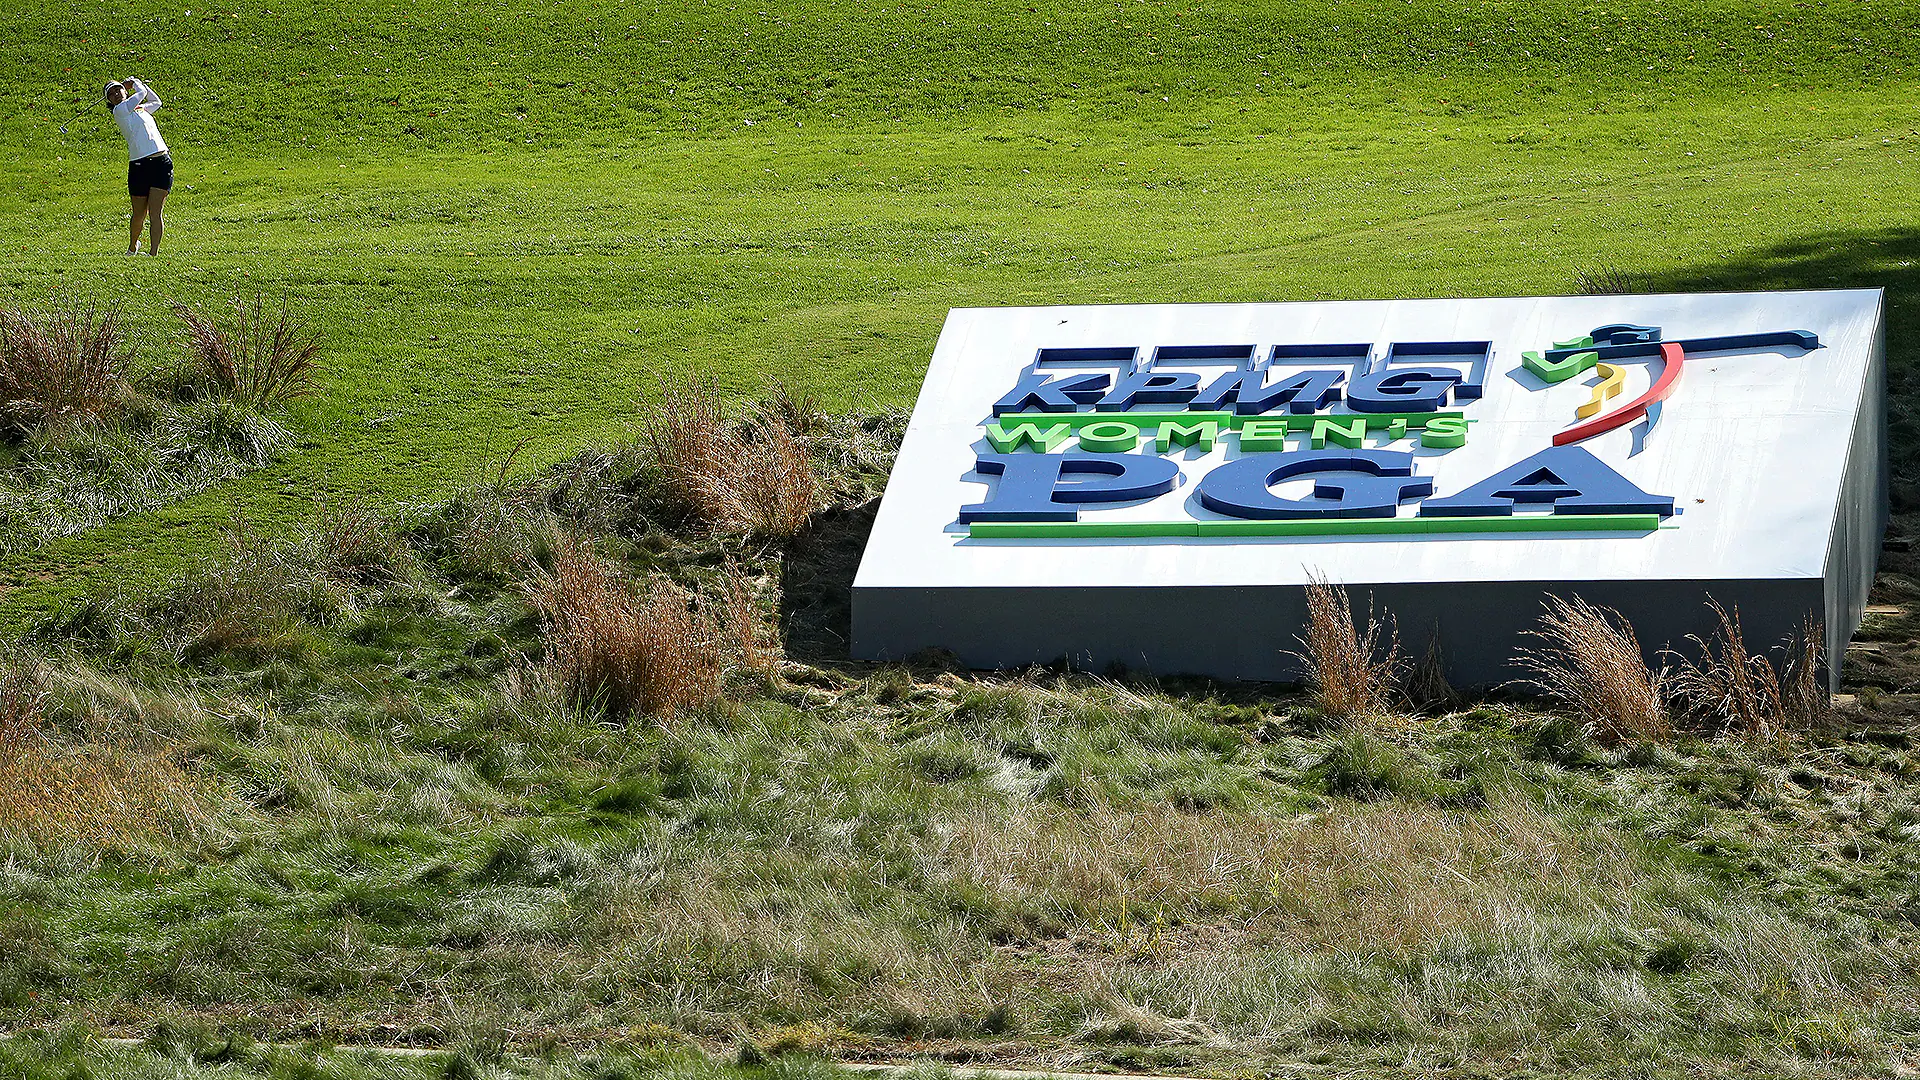 Players expecting a ‘long’ week at Aronimink for the KPMG Women’s PGA